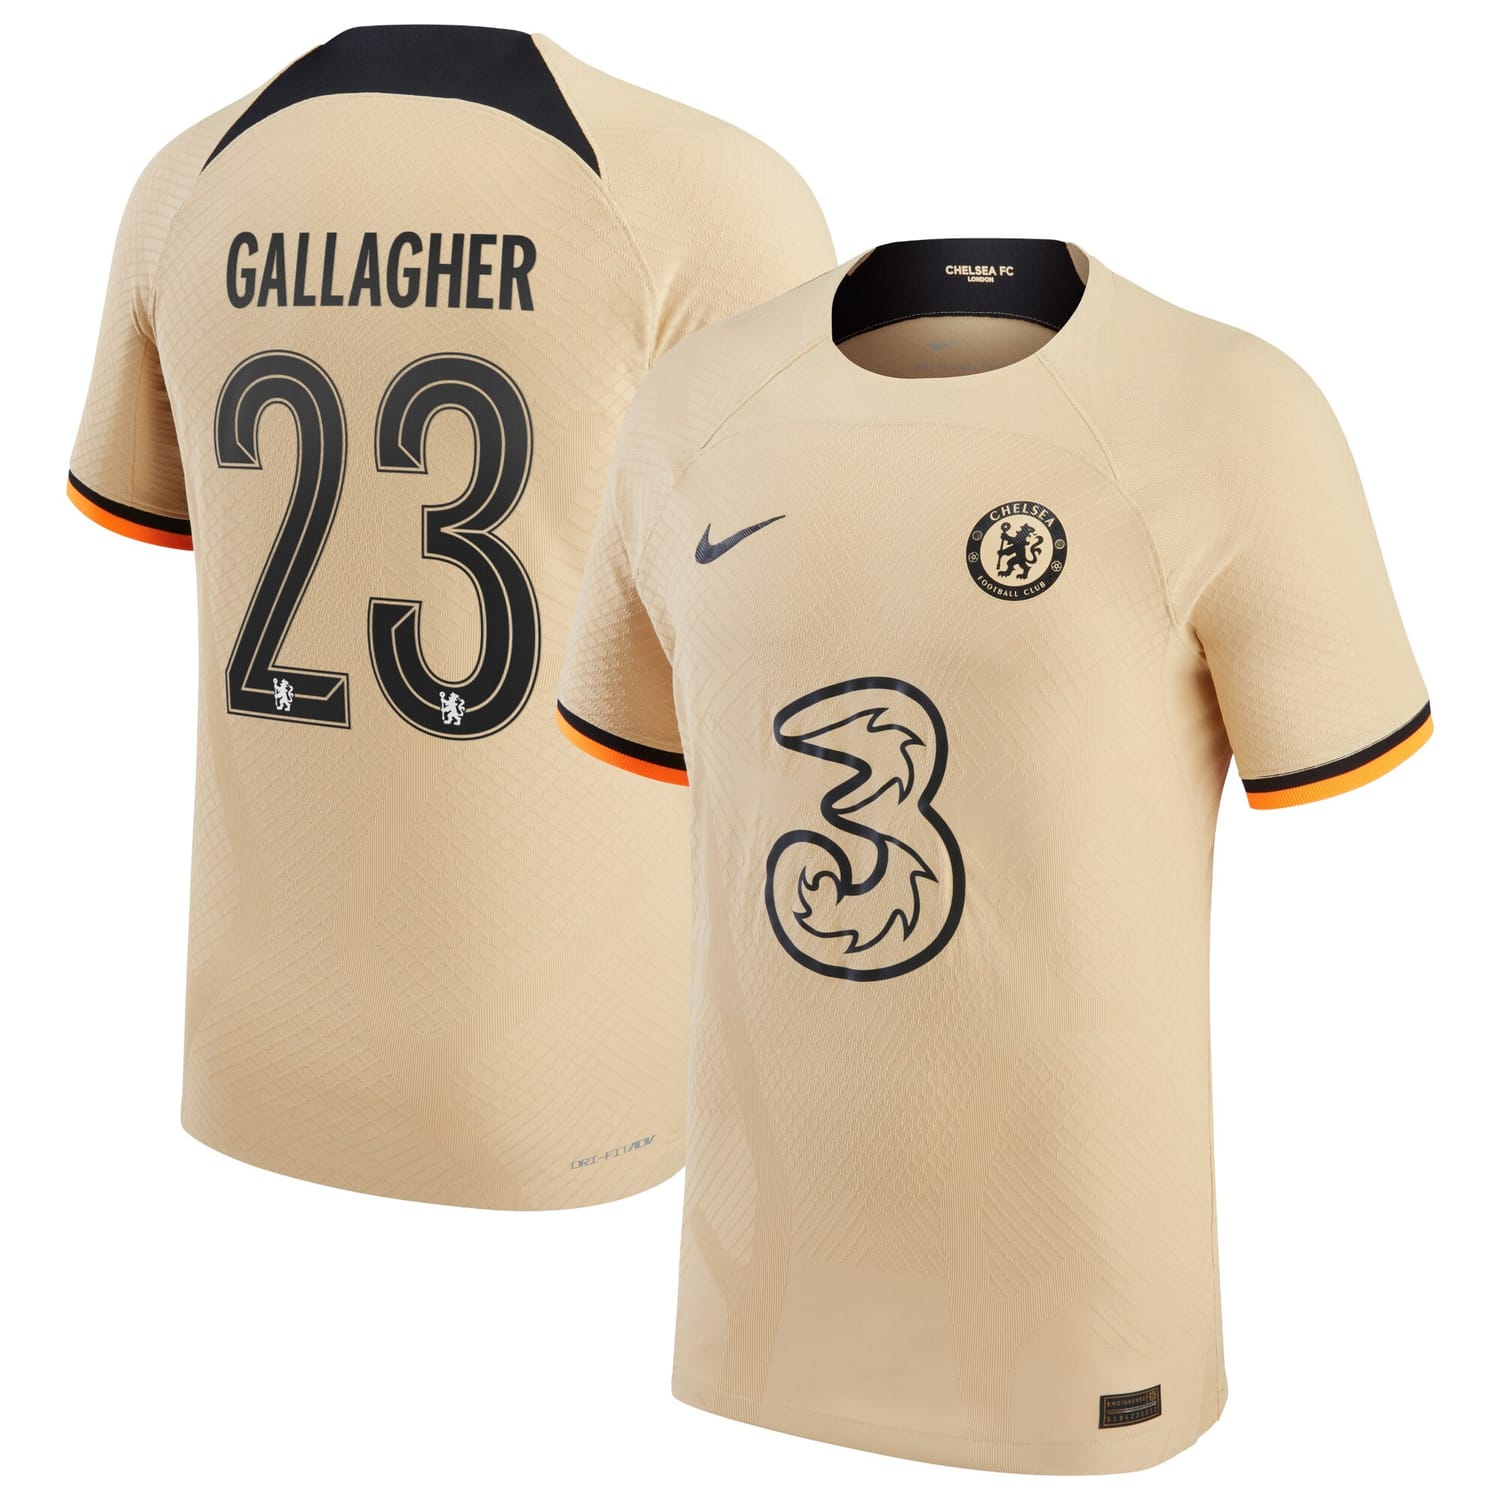 Premier League Chelsea Third Cup Authentic Jersey Shirt 2022-23 player Conor Gallagher 23 printing for Men